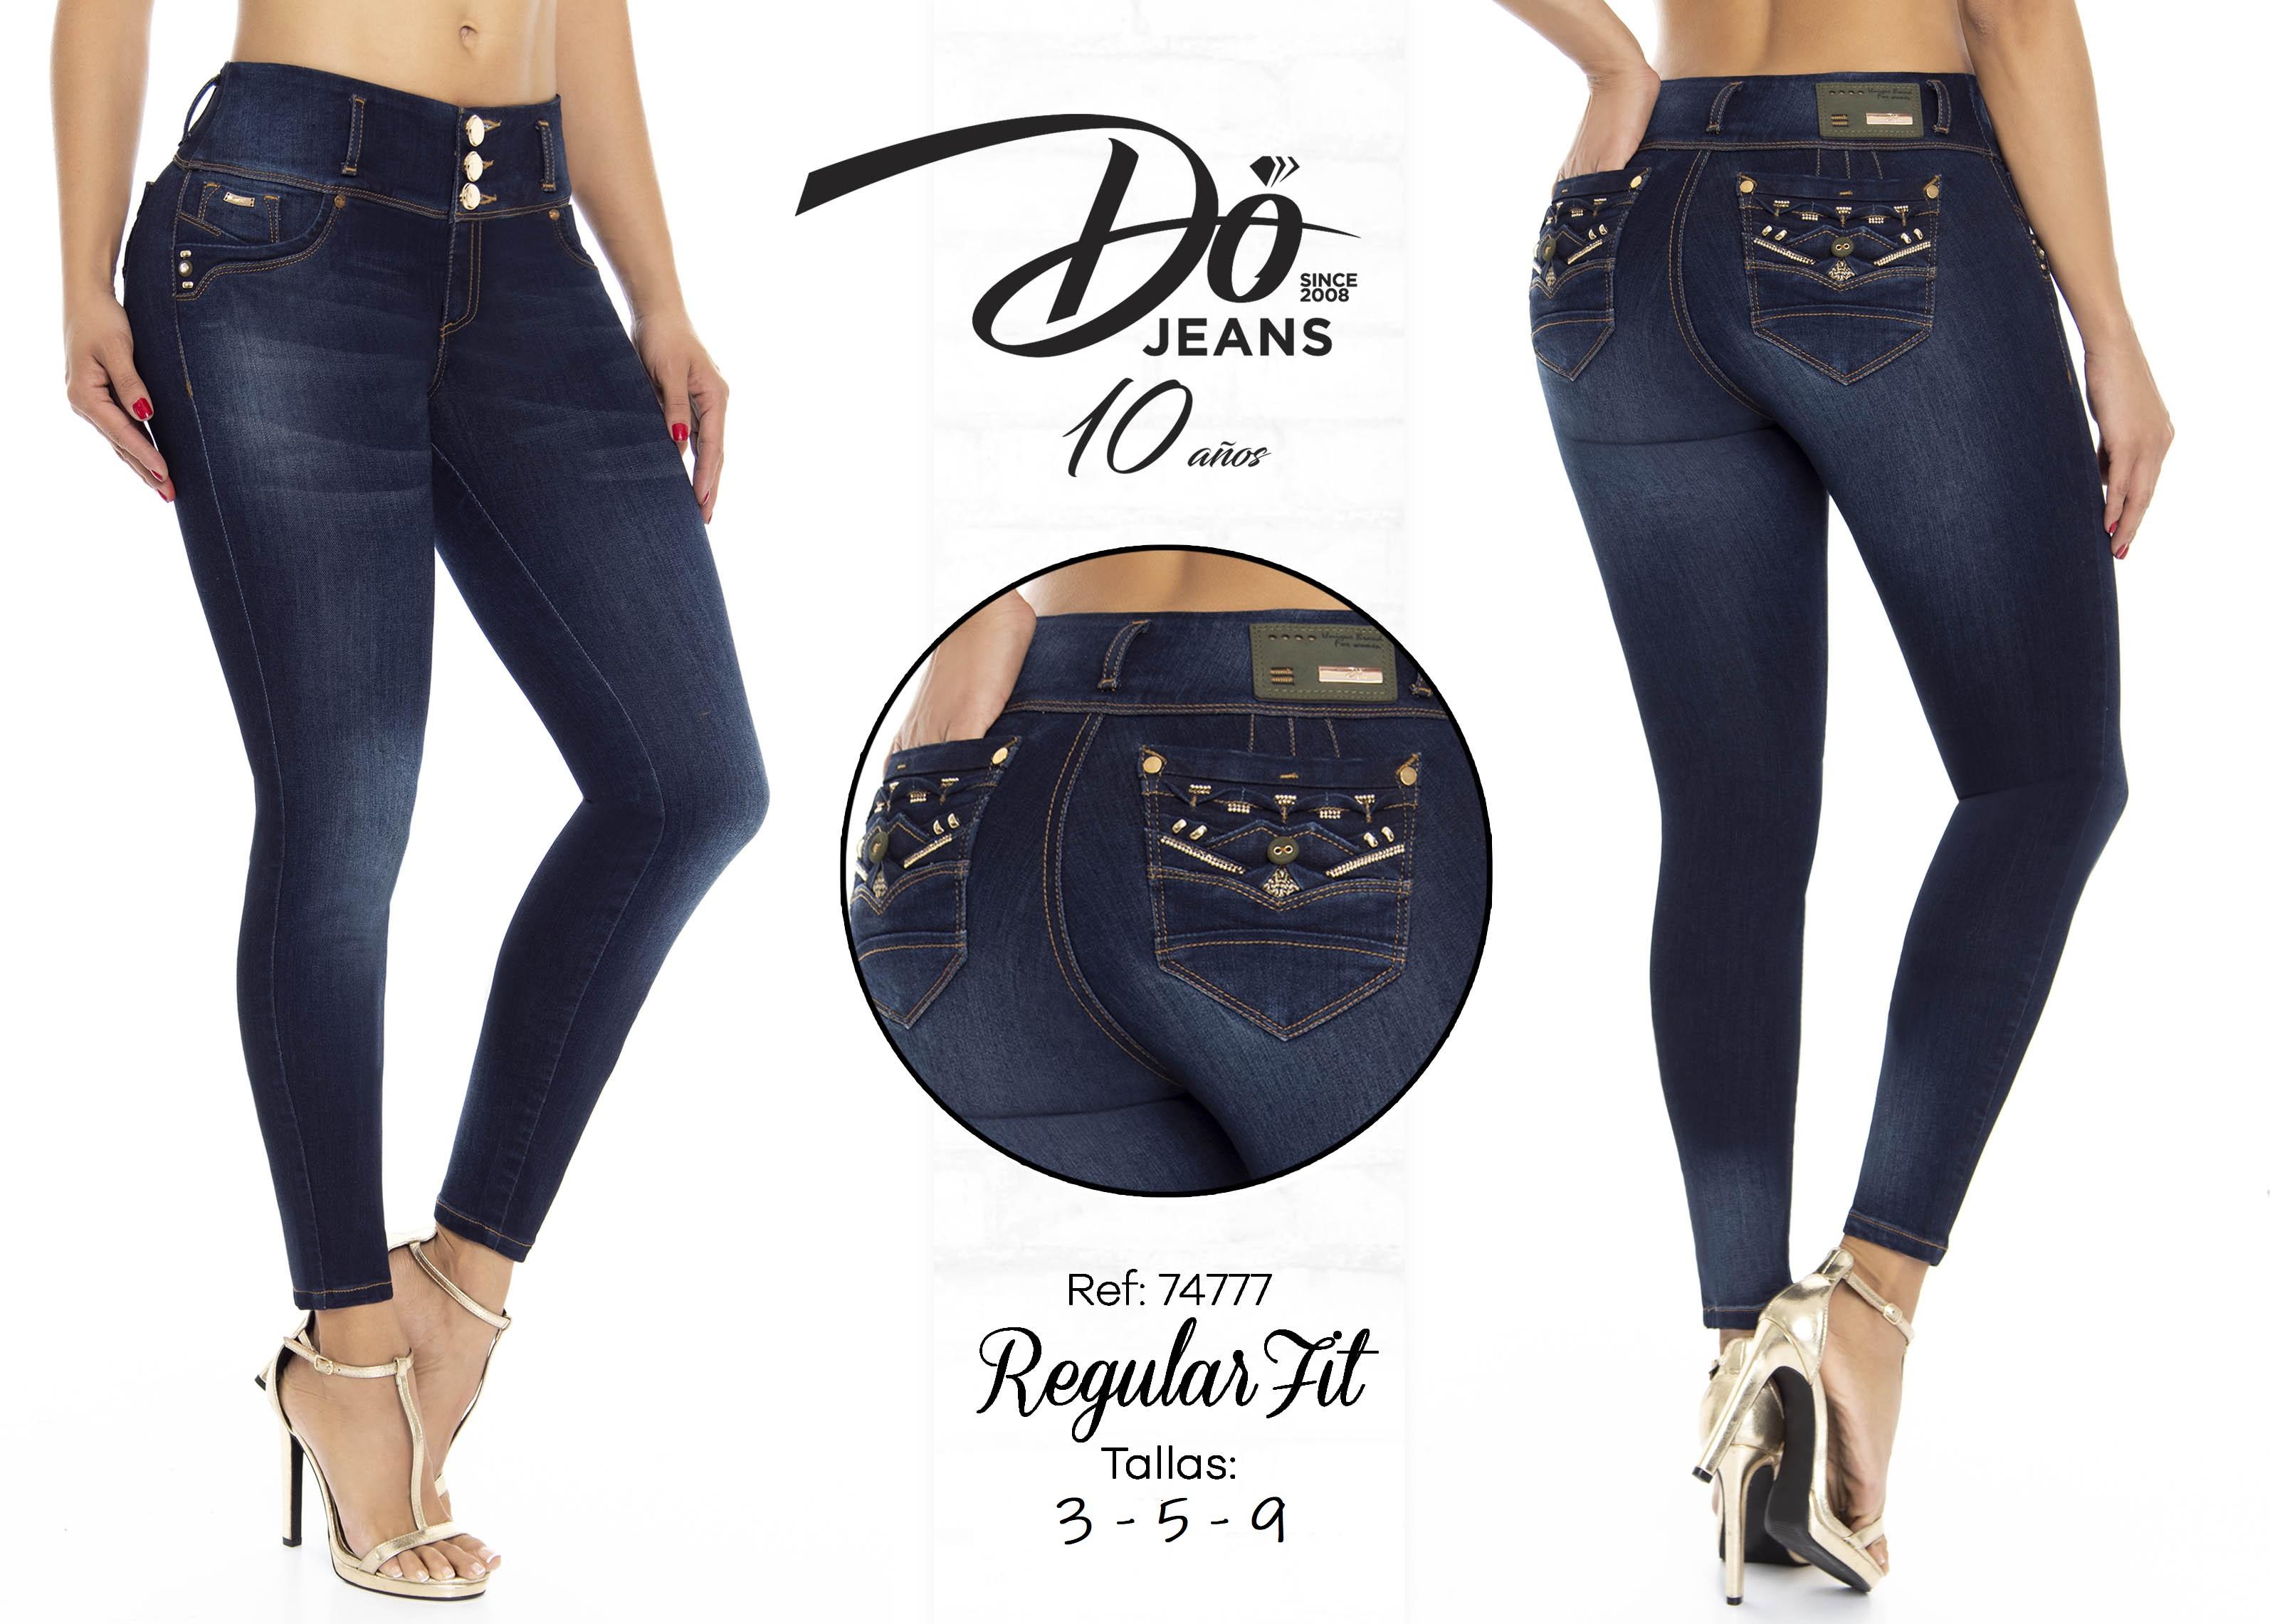 Jeans Levantacola Colombiano - Ref. 248 -74777 D